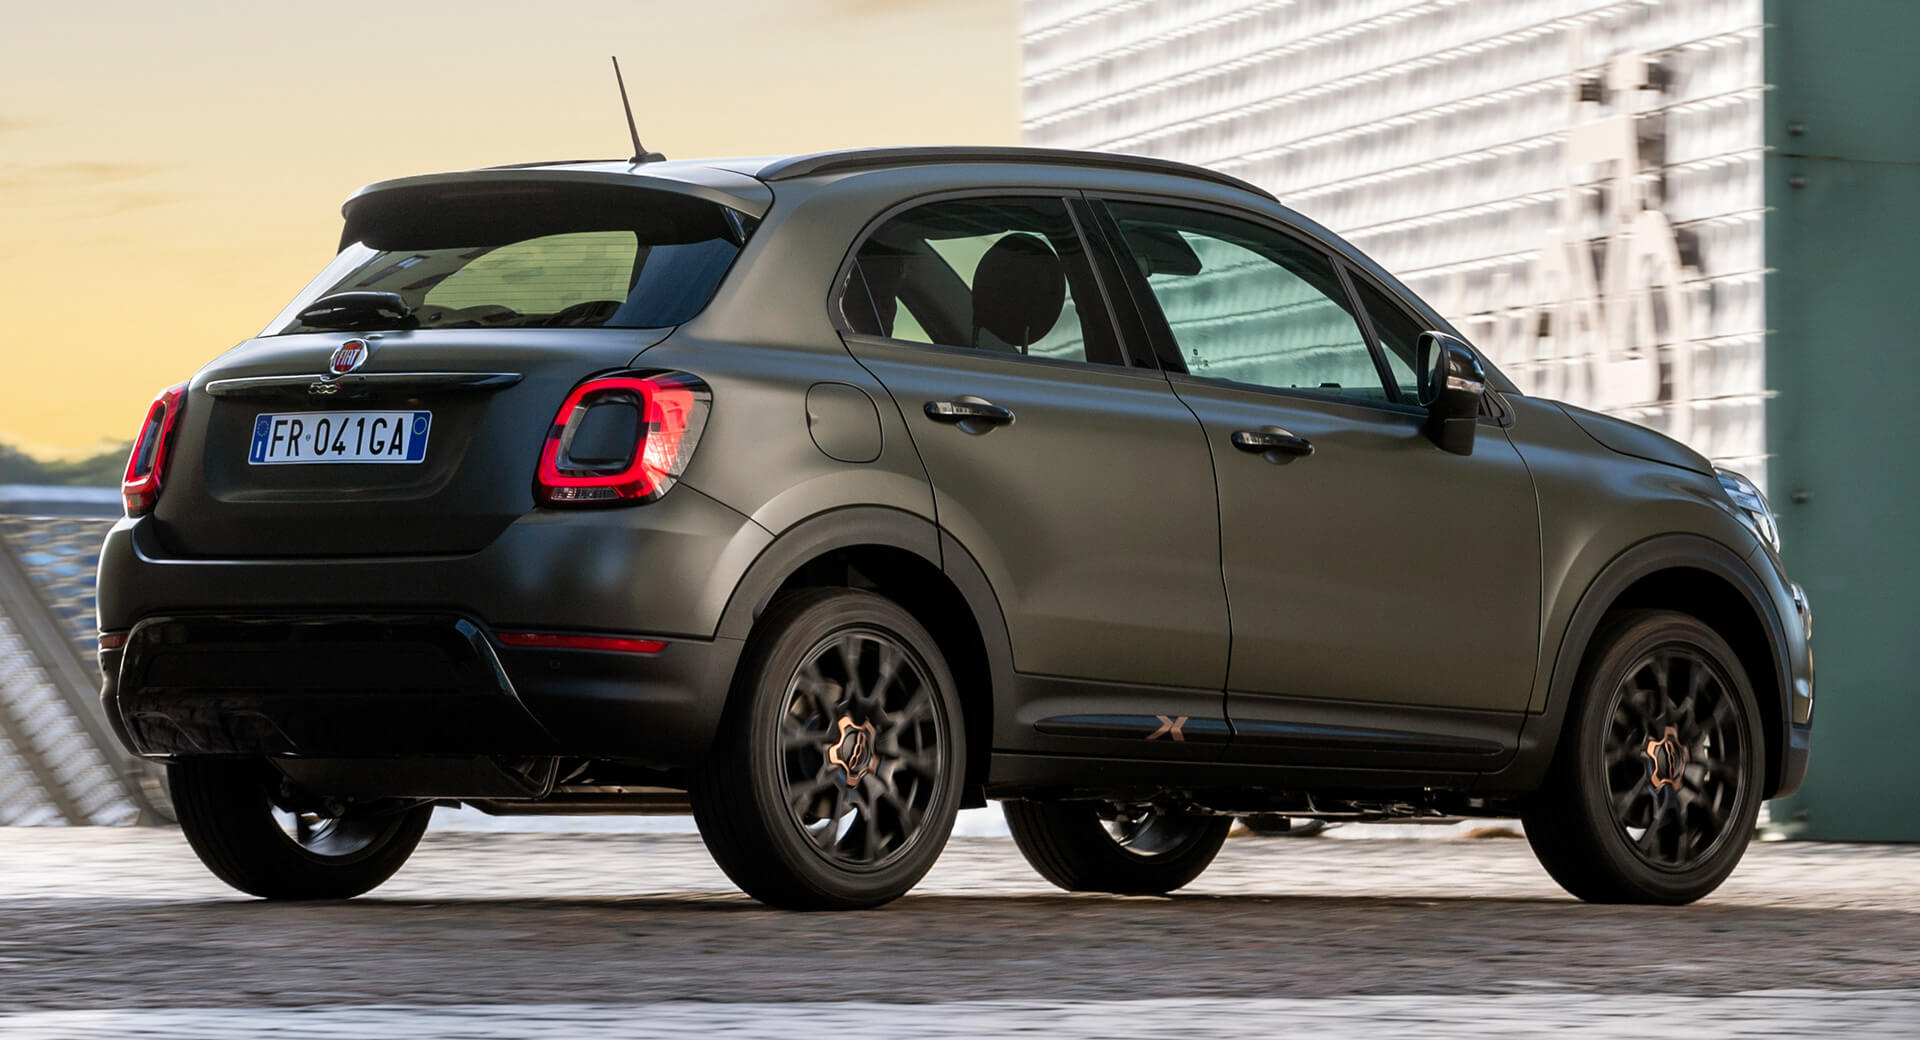 Top 96+ images fiat 500x upgrades - In.thptnganamst.edu.vn